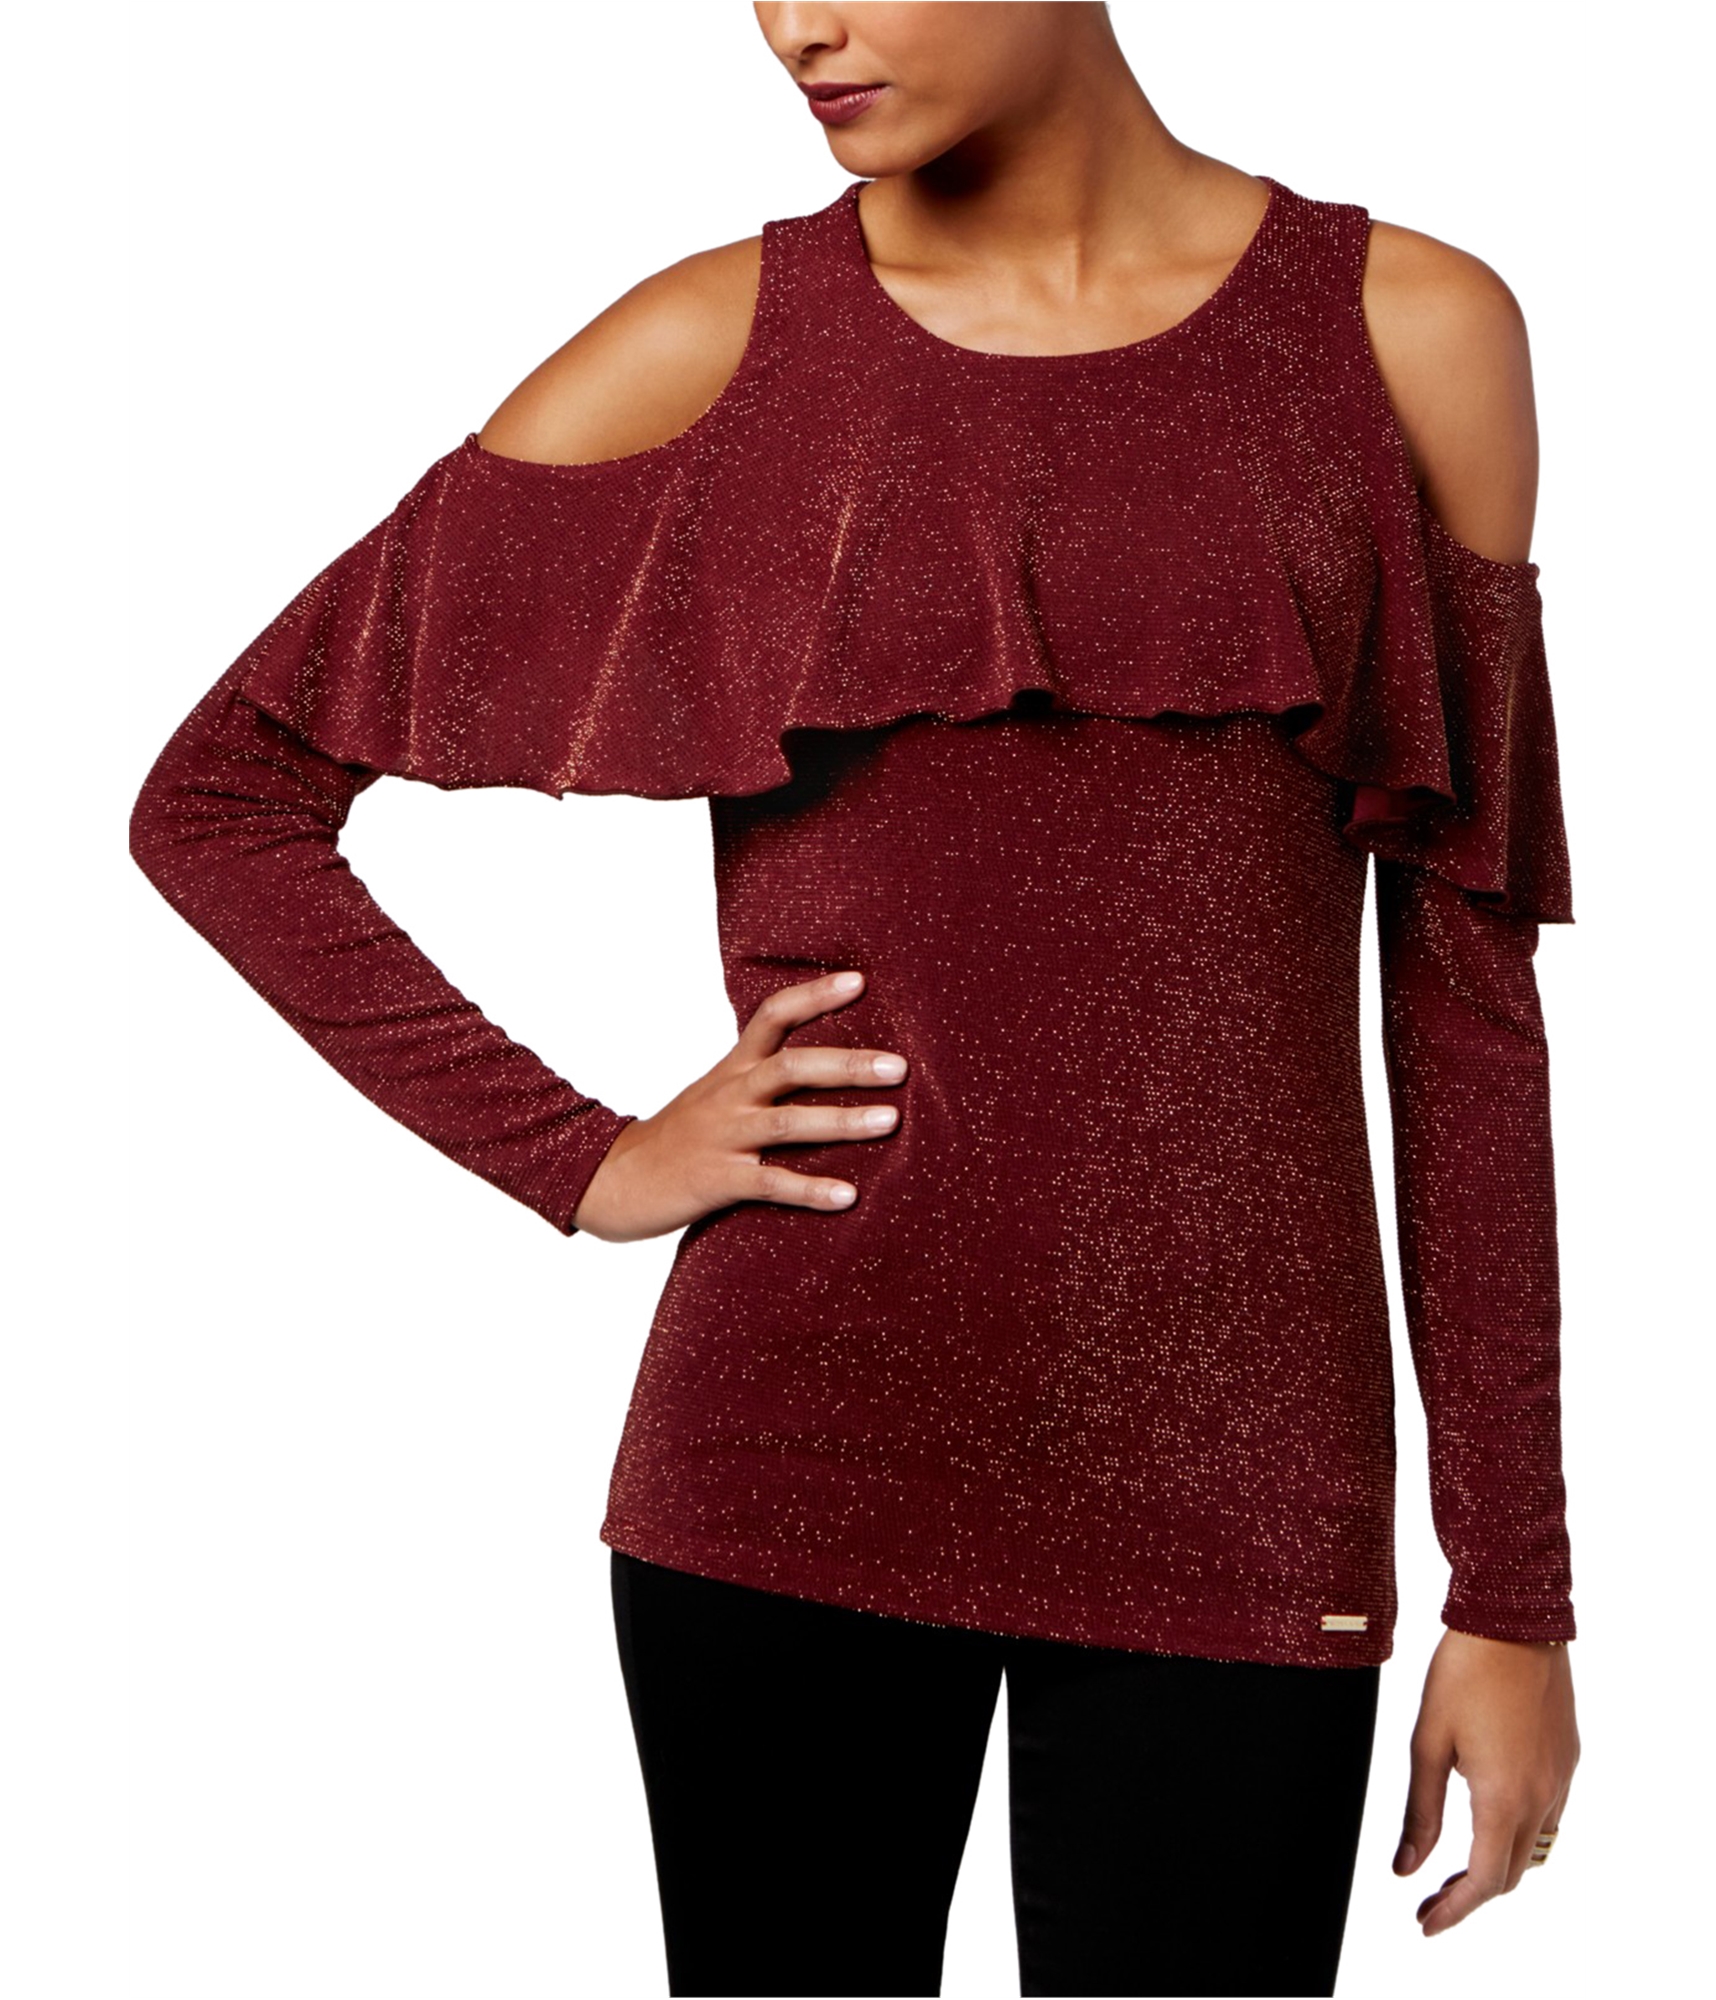 Michael Kors Womens Cold Shoulder Pullover Sweater, Red, Small | eBay